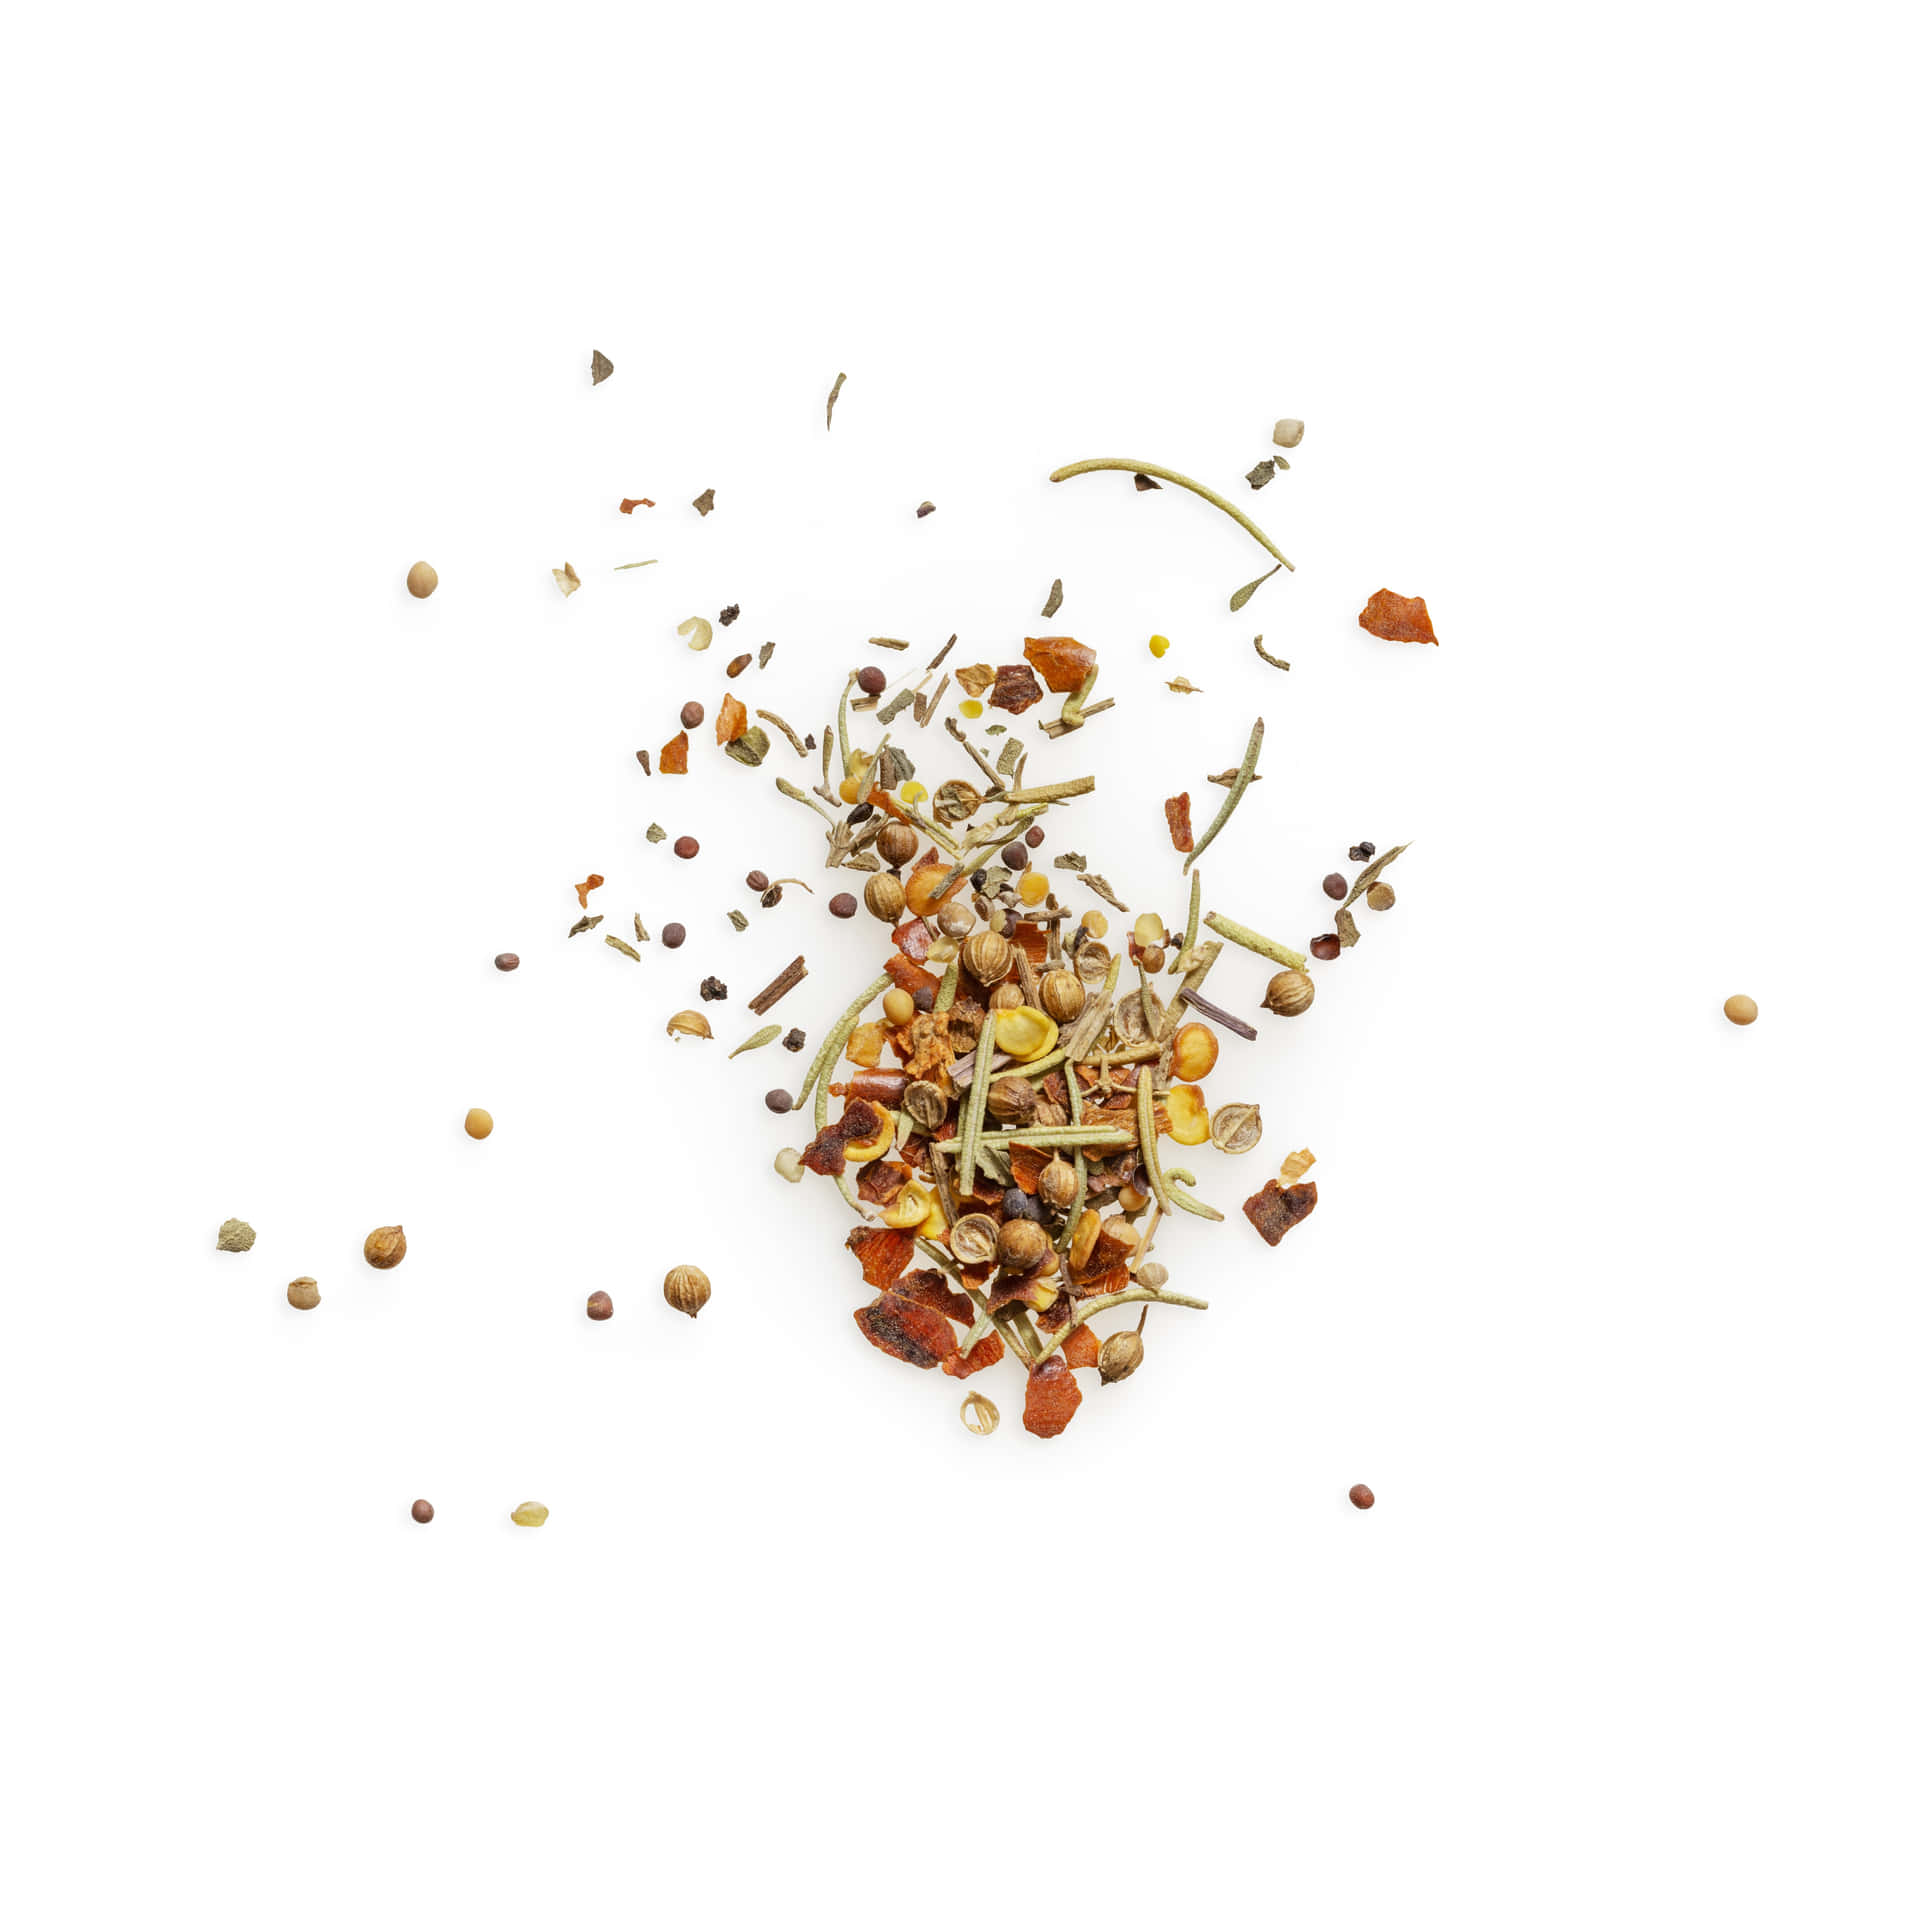 A Pile Of Dried Herbs And Spices On A White Background